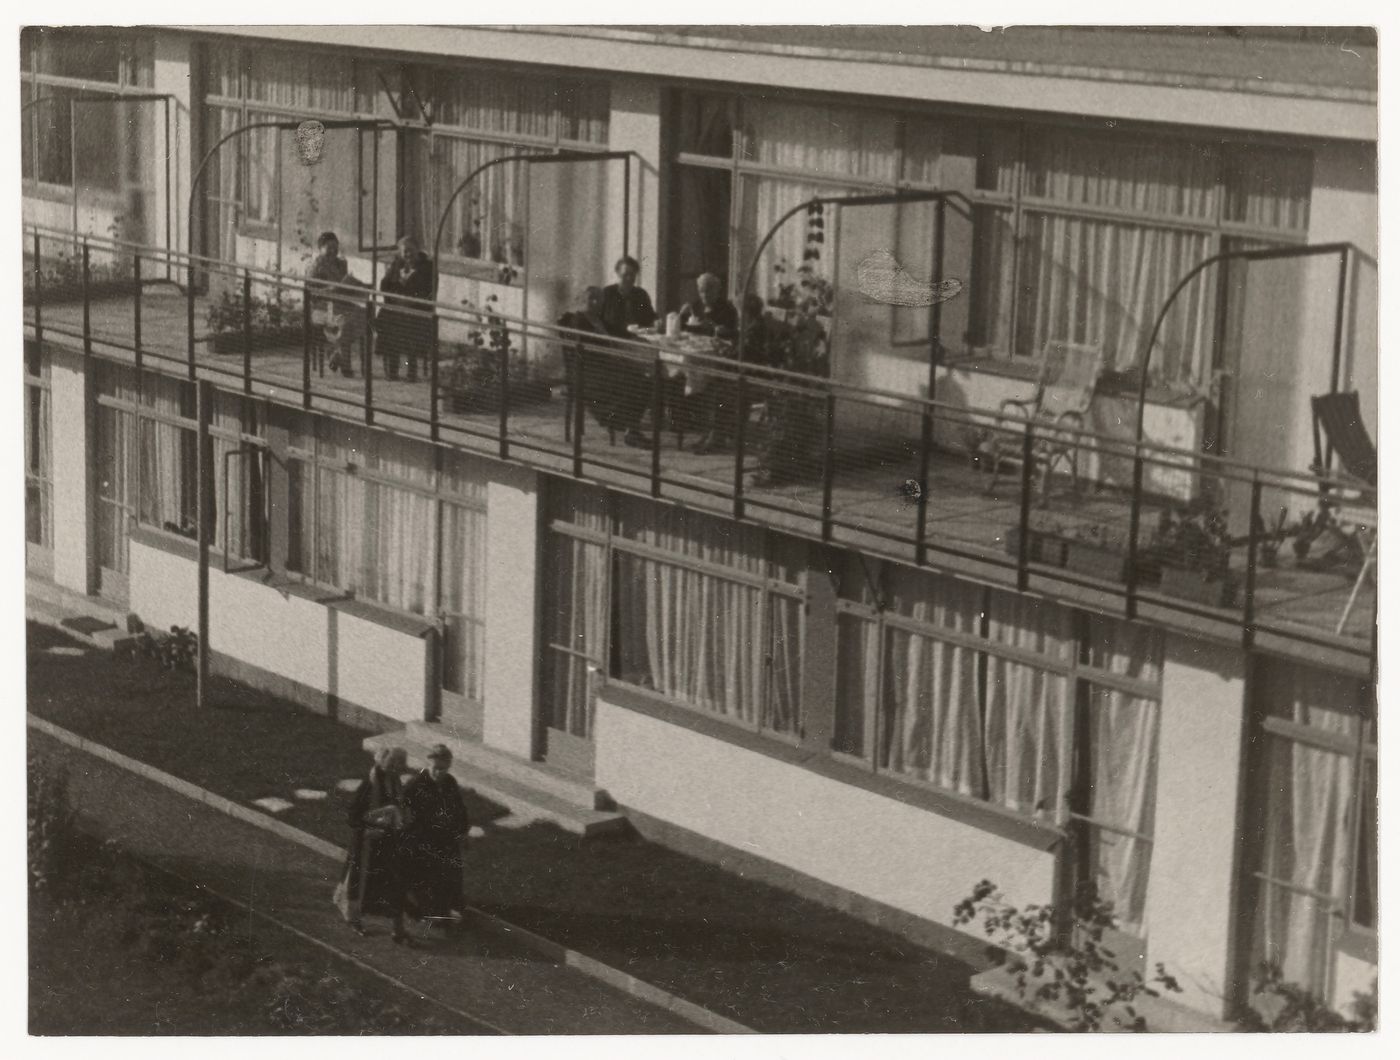 Exterior view of Budge Foundation Old People's Home showing residents sitting on the second-floor balconies, Frankfurt am Main, Germany